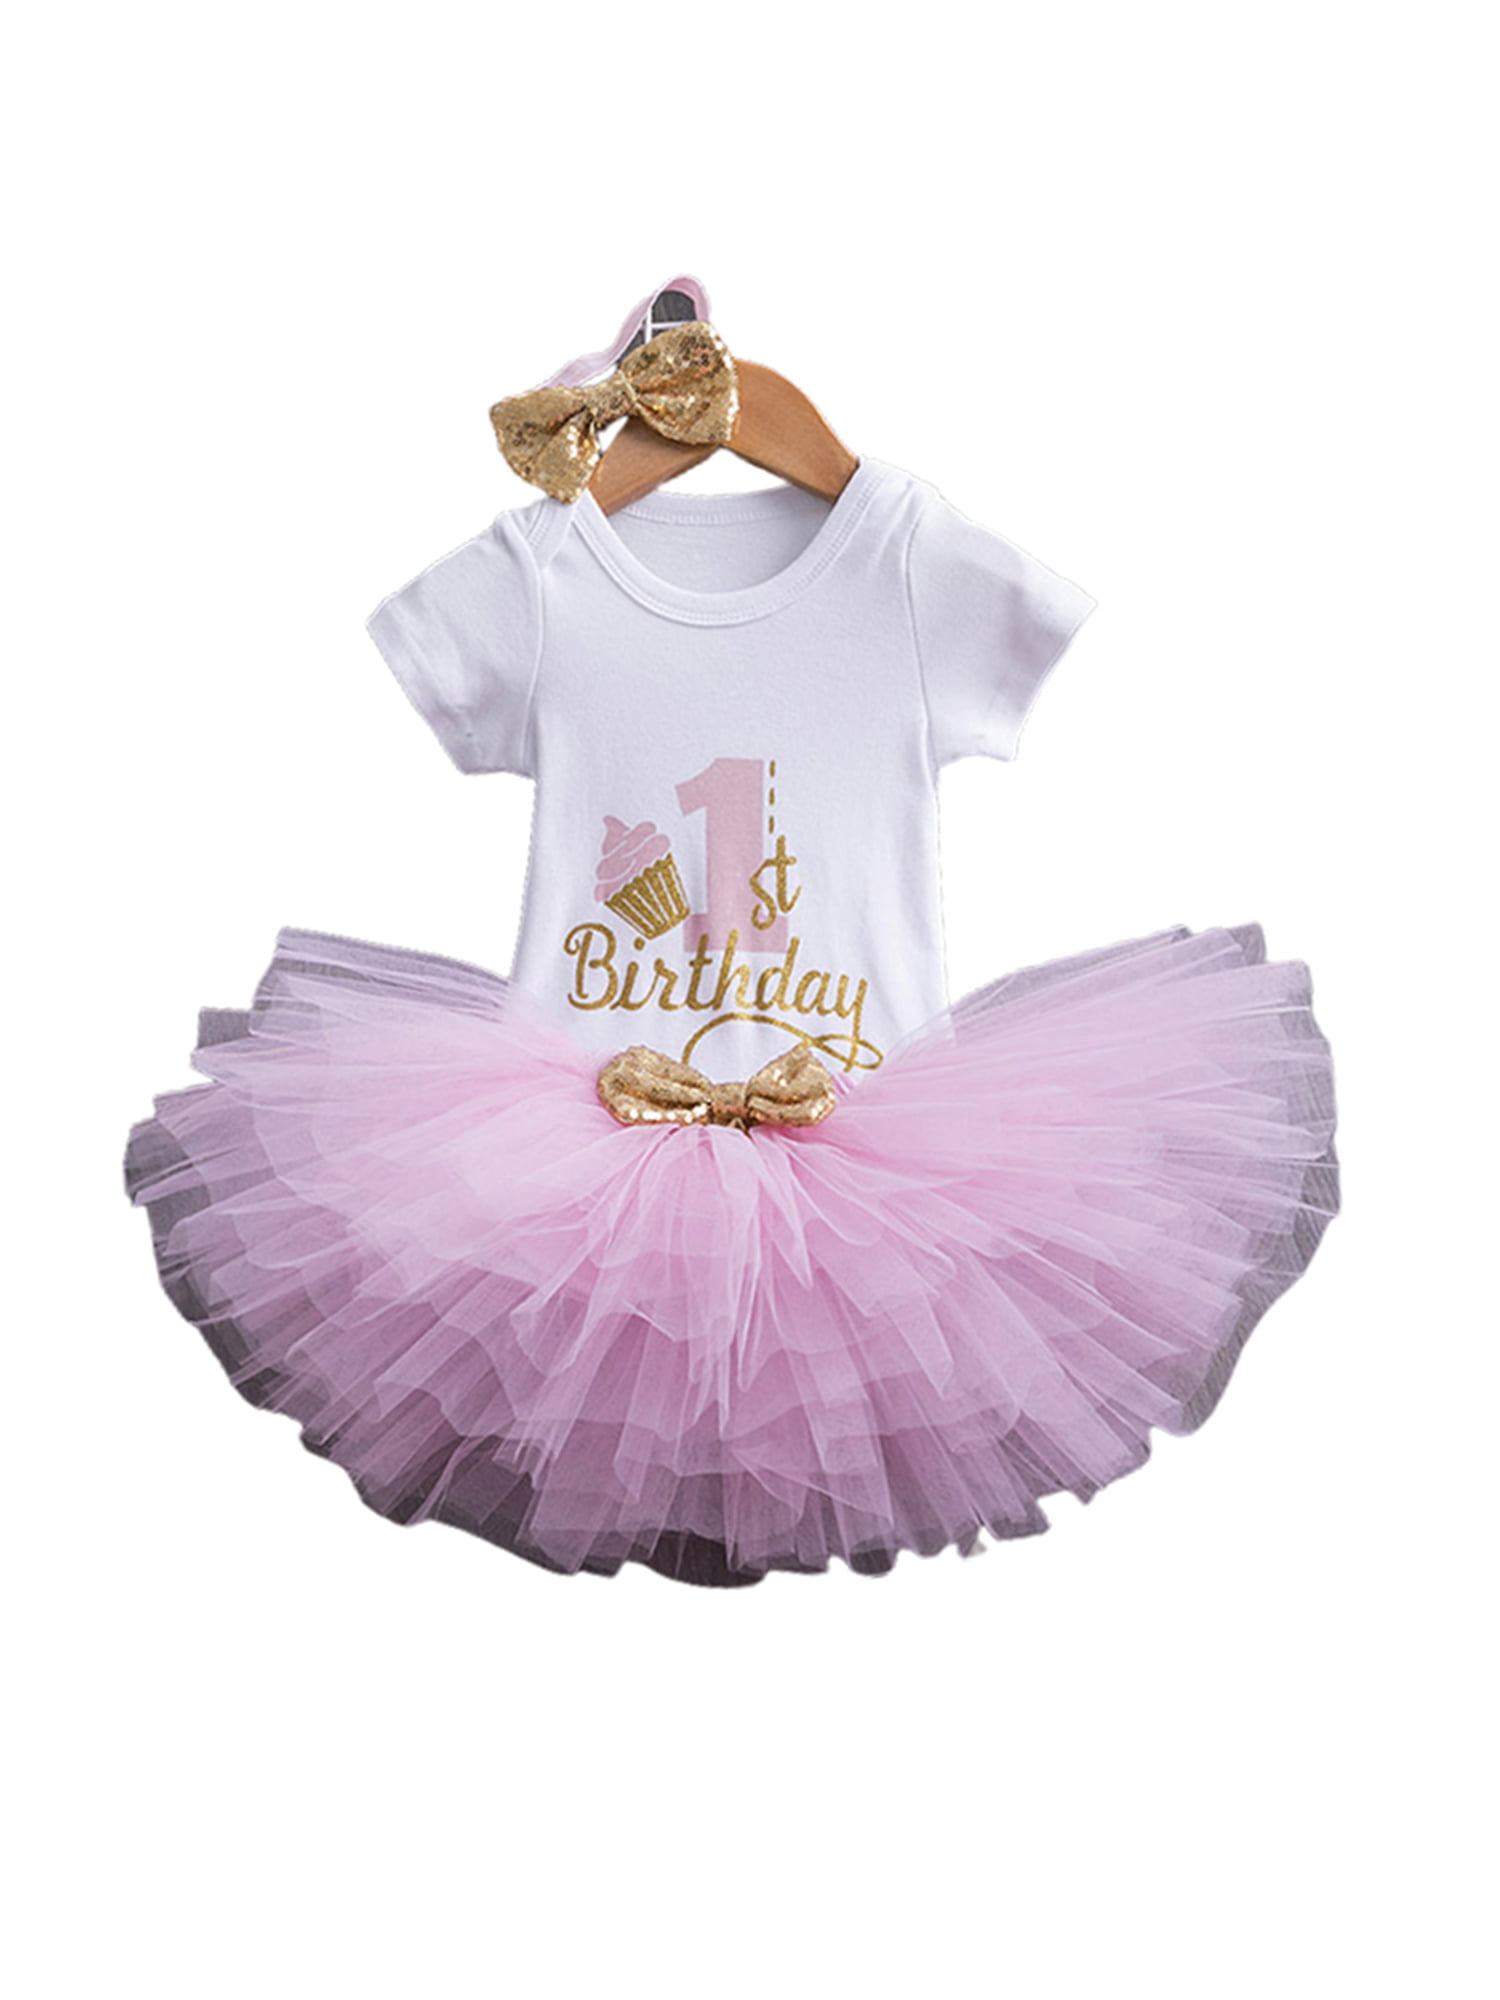 Baby Girls One Year Birthday Tulle Skirt Romper Outfit Set Romper Headband Suit 